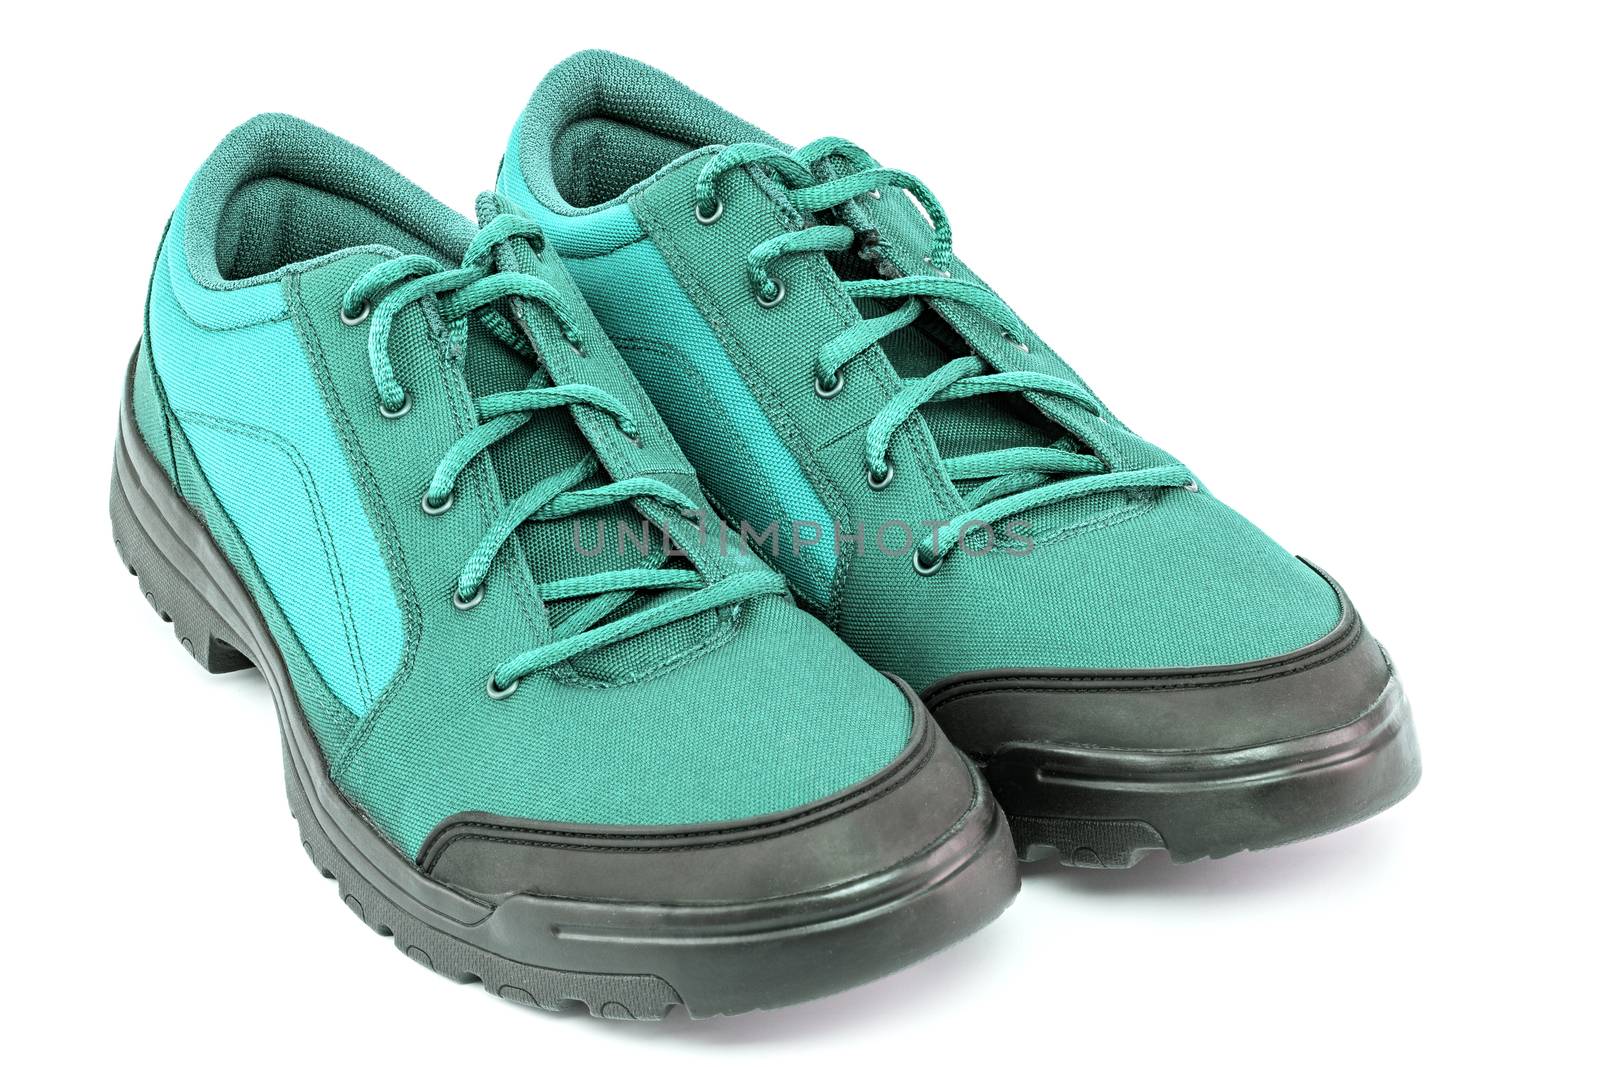 a pair of cheap aqua mint turquoise green hiking shoes isolated on white background - perspective close-up view by z1b